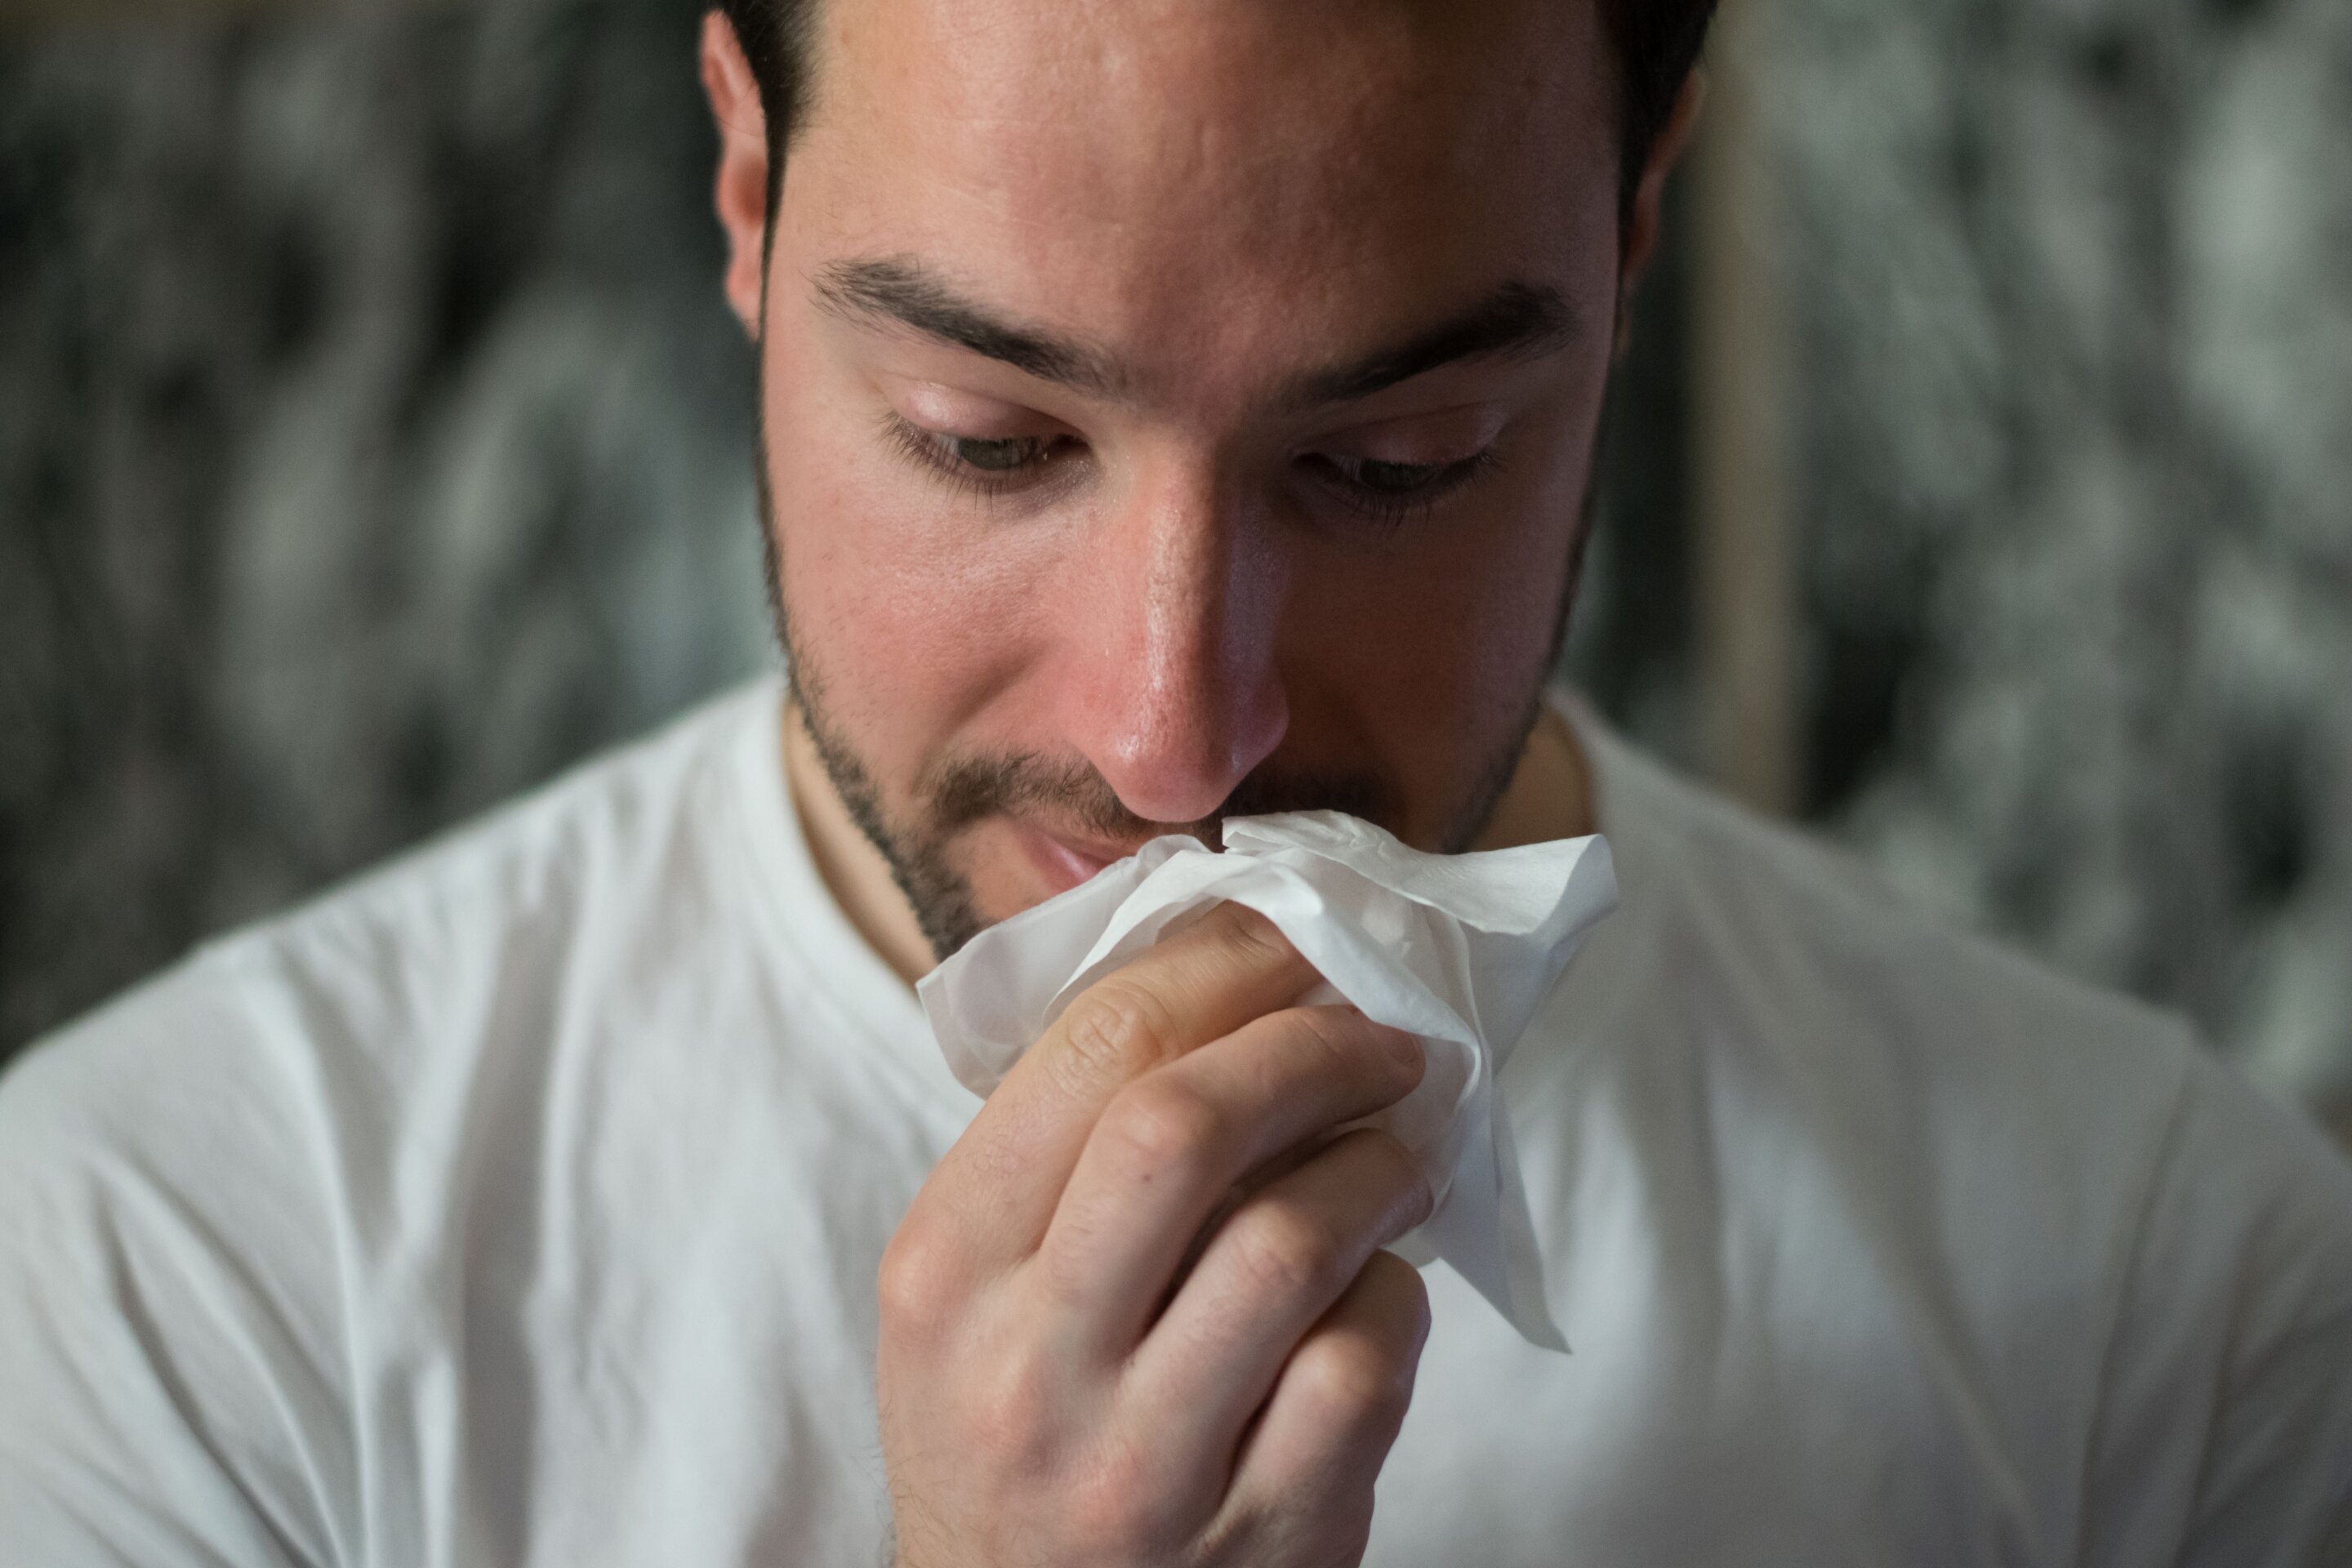 #When is a cough a concern?